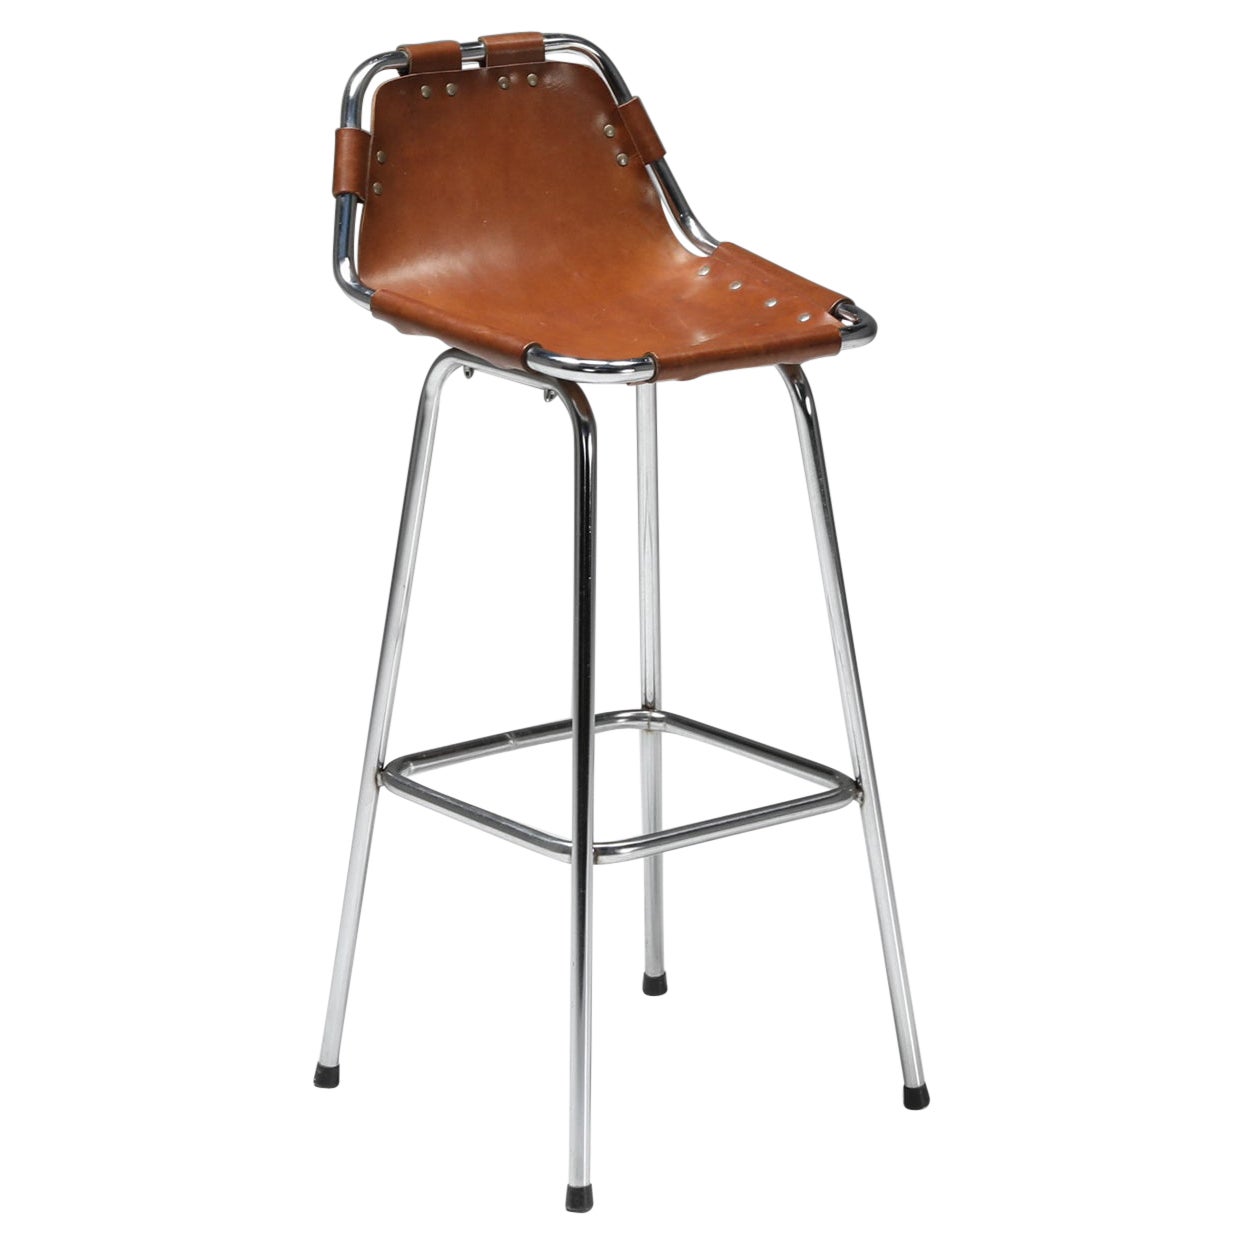 High Bar Stool by Charlotte Perriand for the Les Arcs Ski Resort